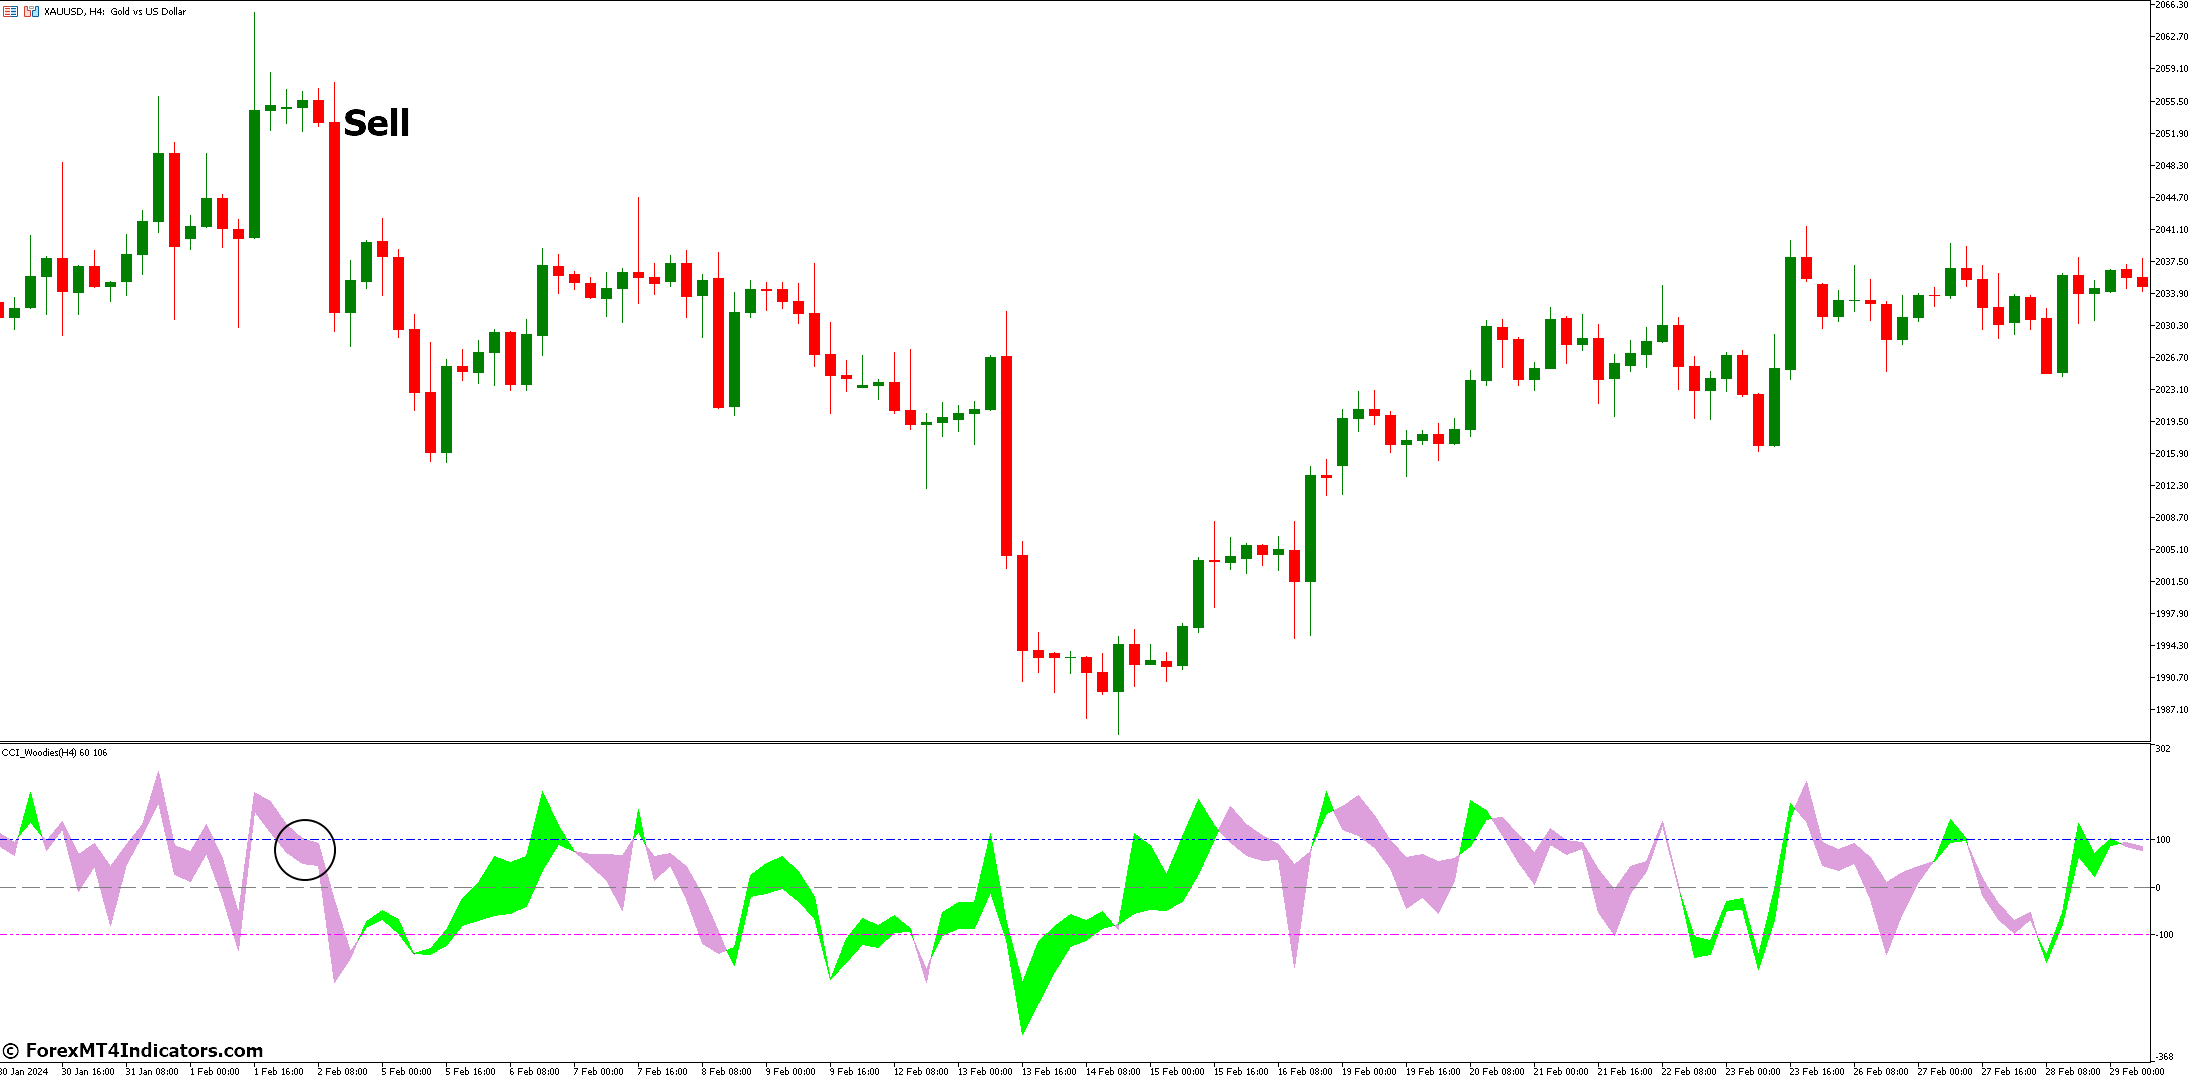 How to Trade with Cci Woodies Forex MT5 Indicator - Sell Entry